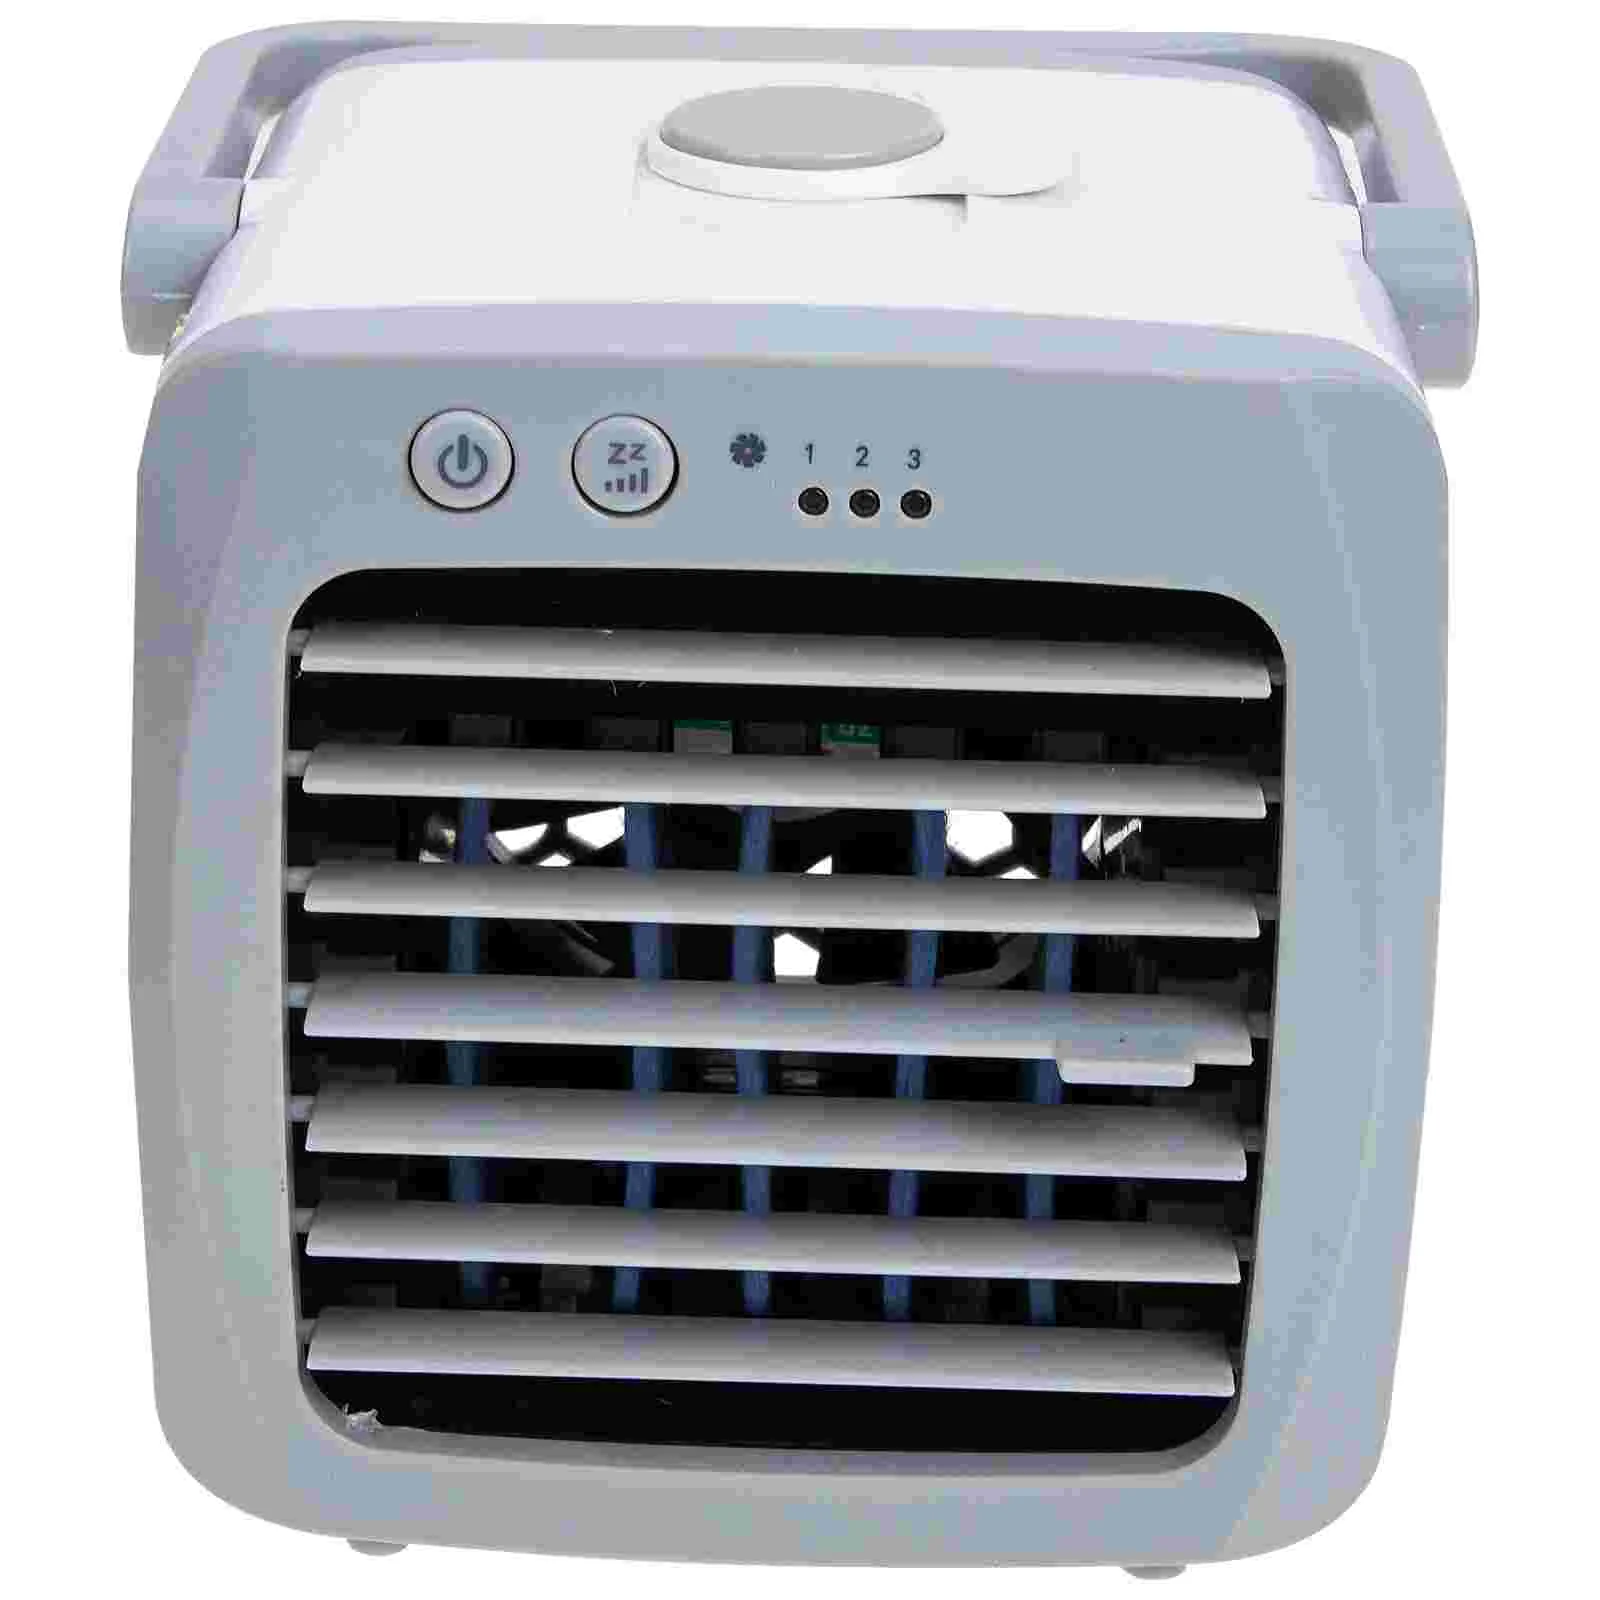 

Portable Air Cooler Plastic Cooling Fan Small Conditioning USB Dormitory Humidifier Desktop Conditioner Office